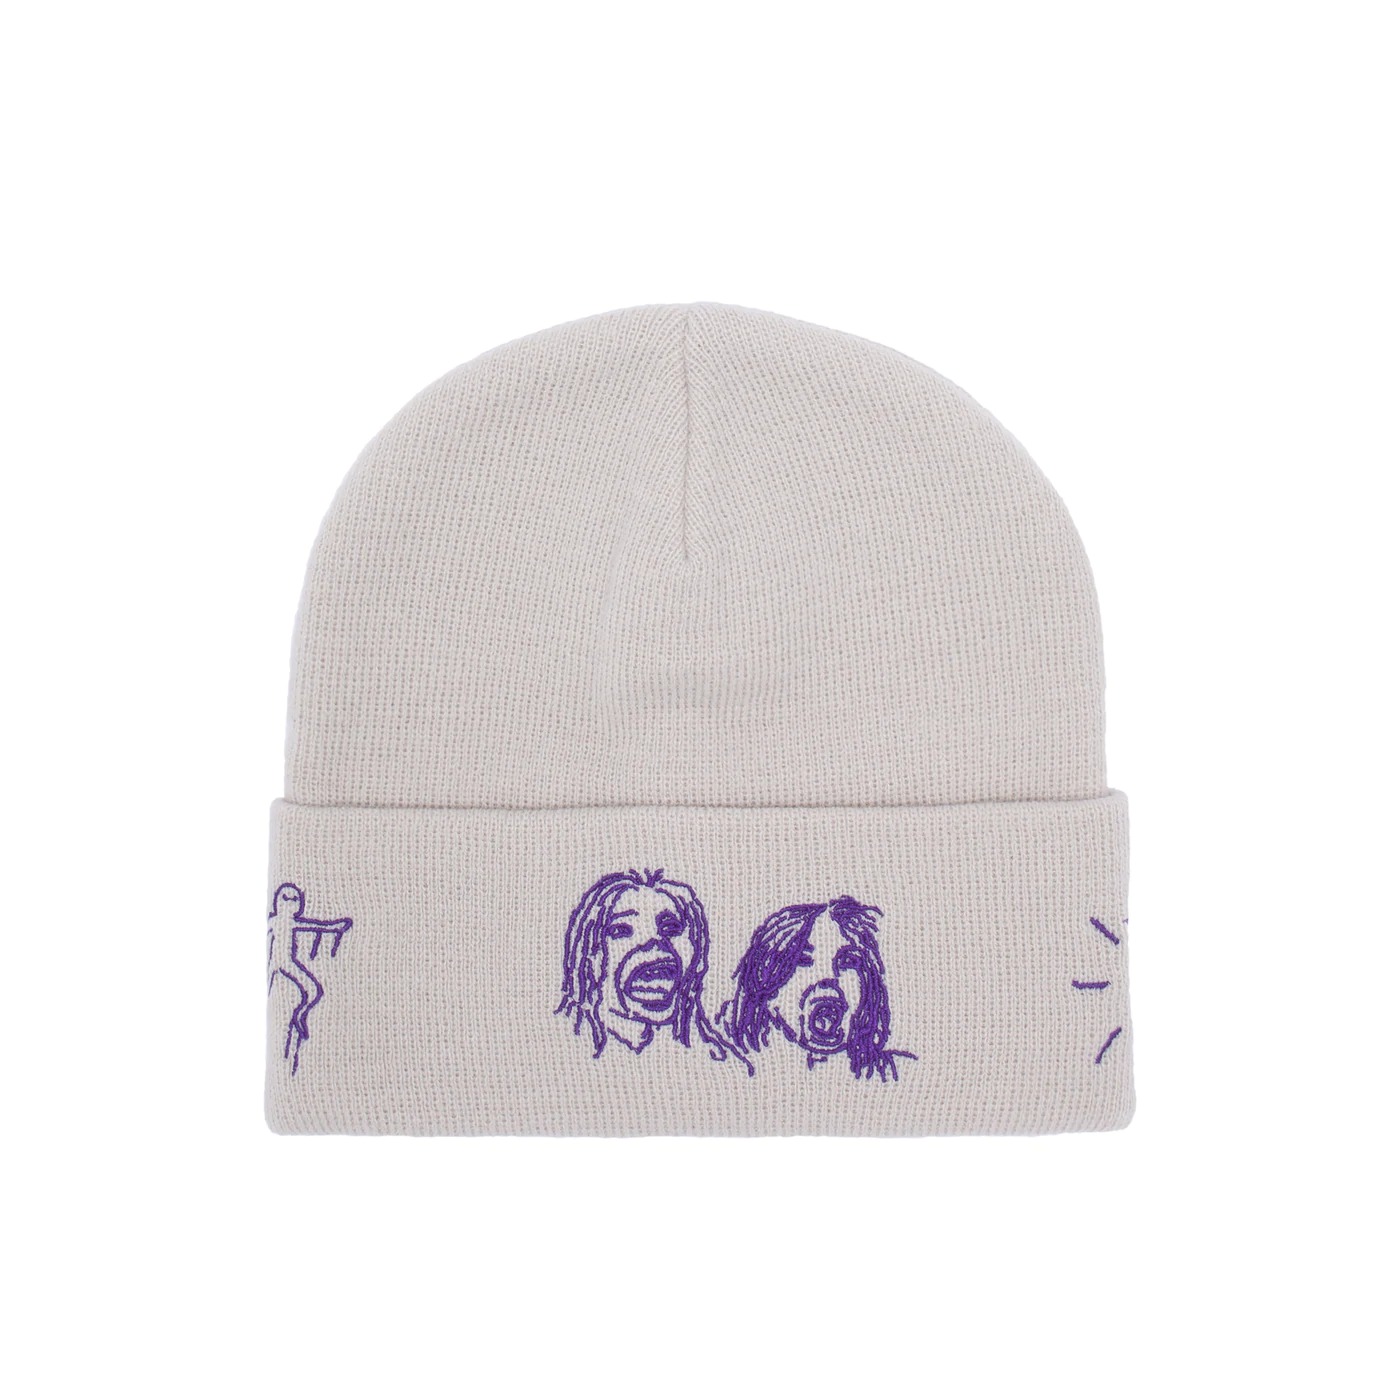 FUCKING AWESOME Sketchy Cuff Beanie ビーニー - ニットキャップ/ビーニー